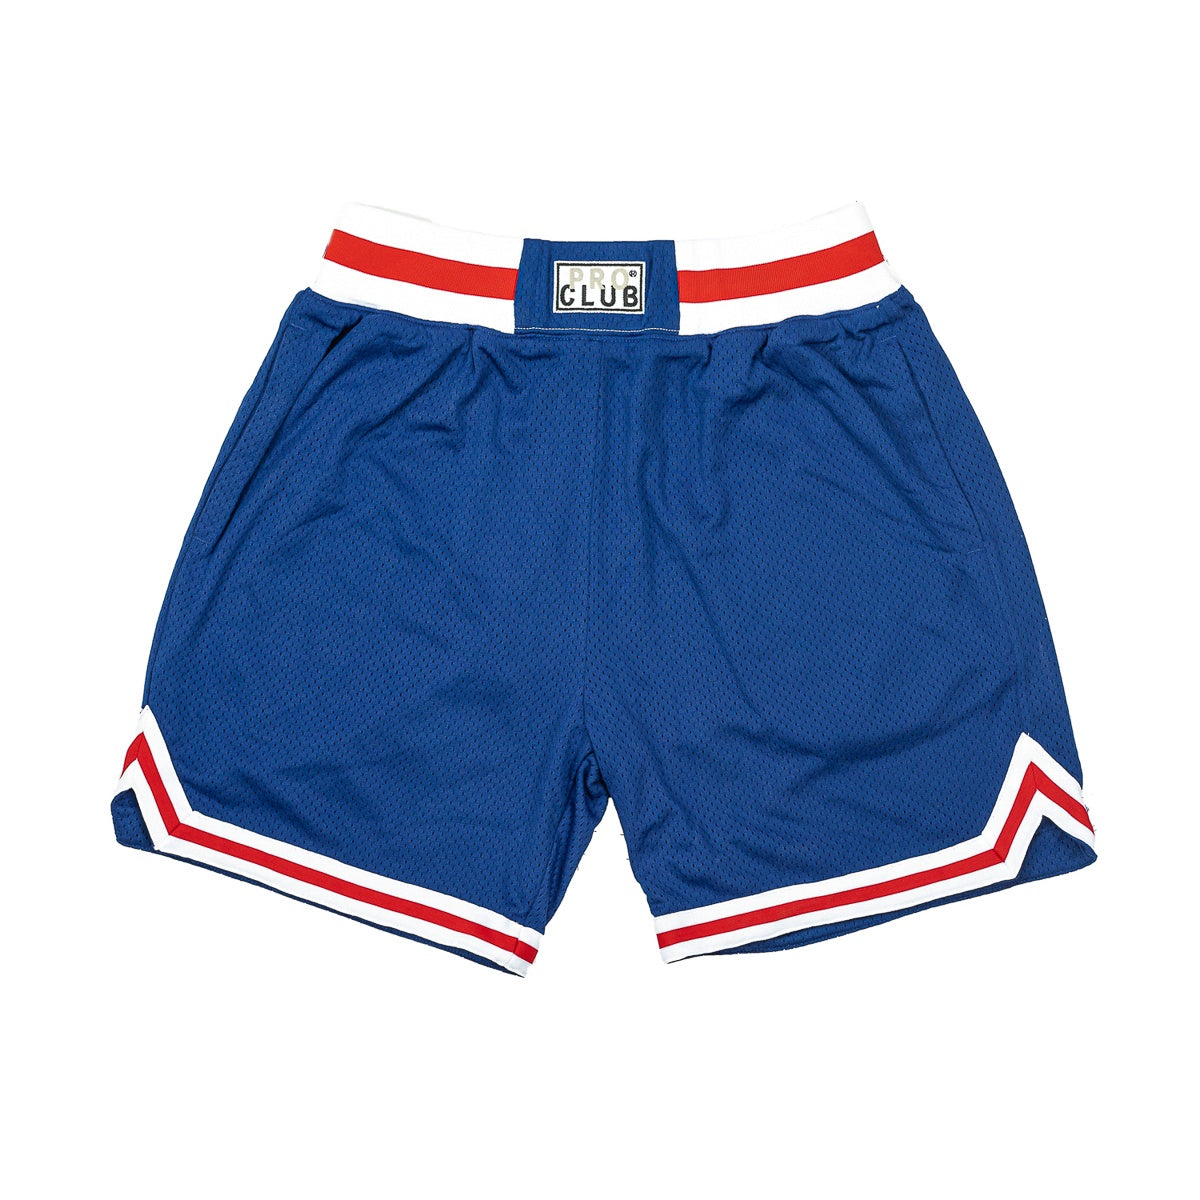 Pro Club Classic Basketball Shorts - Blue/White/Red